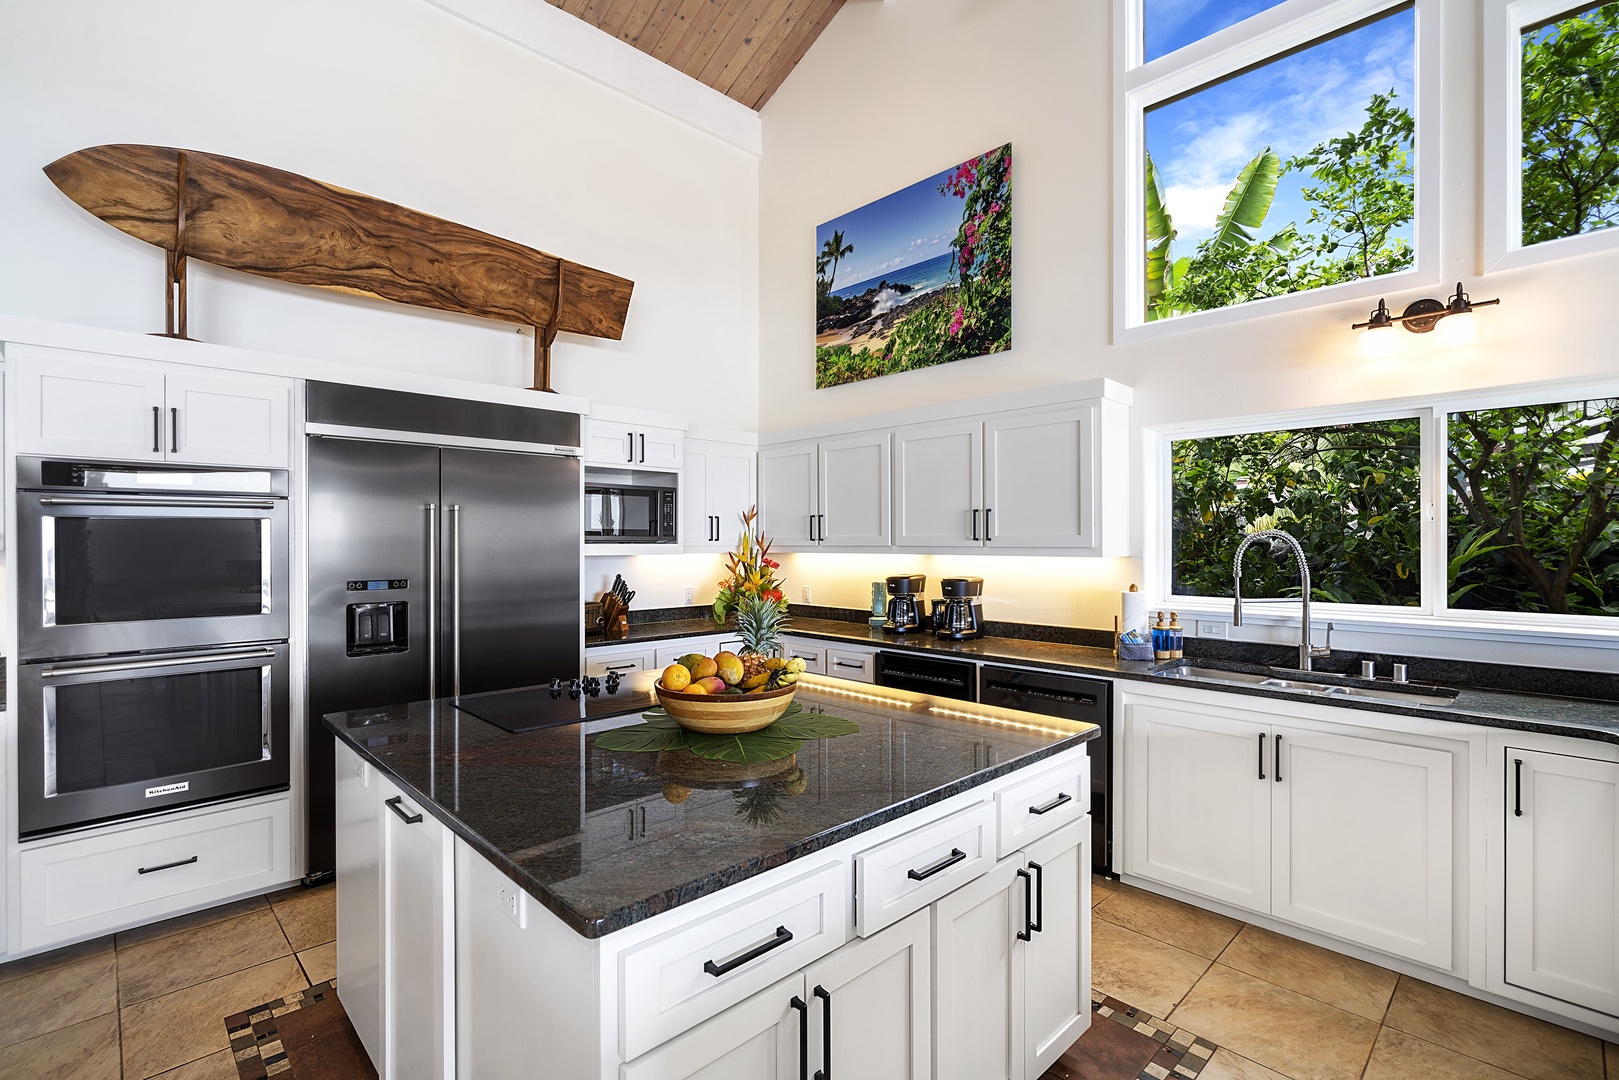 Kailua Kona Vacation Rentals, Hale Pua - Large island allows for multiple people to patriciate in meal prep